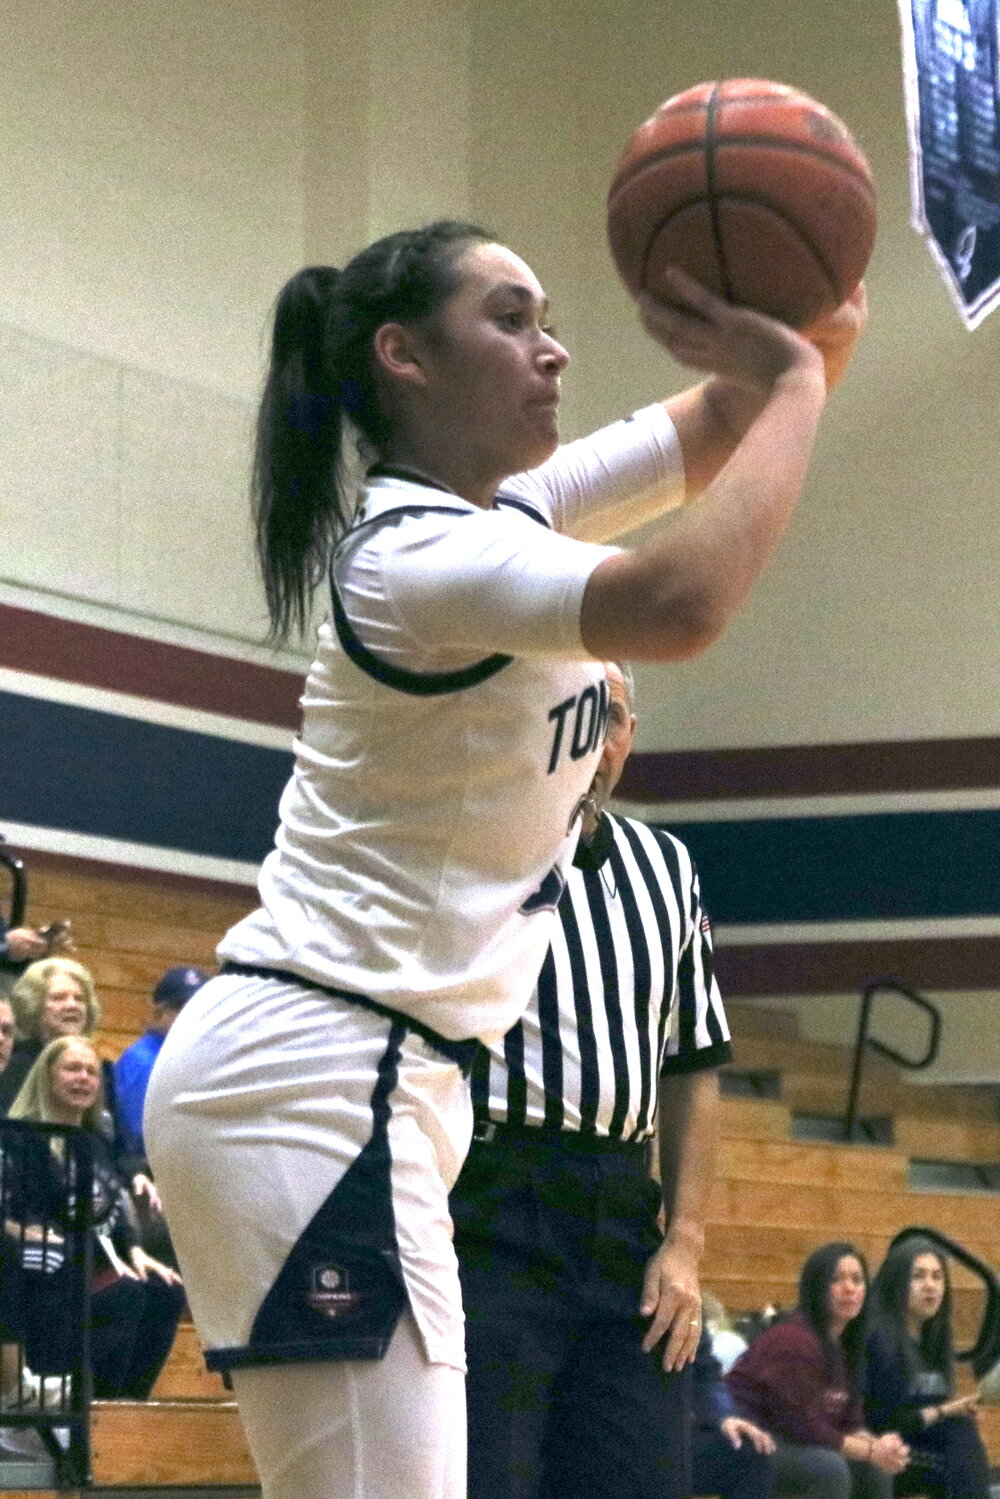 Rihanna DeLeon shoots a 3-pointer during Tuesday's game between Tompkins and Cinco Ranch at the Tompkins gym.